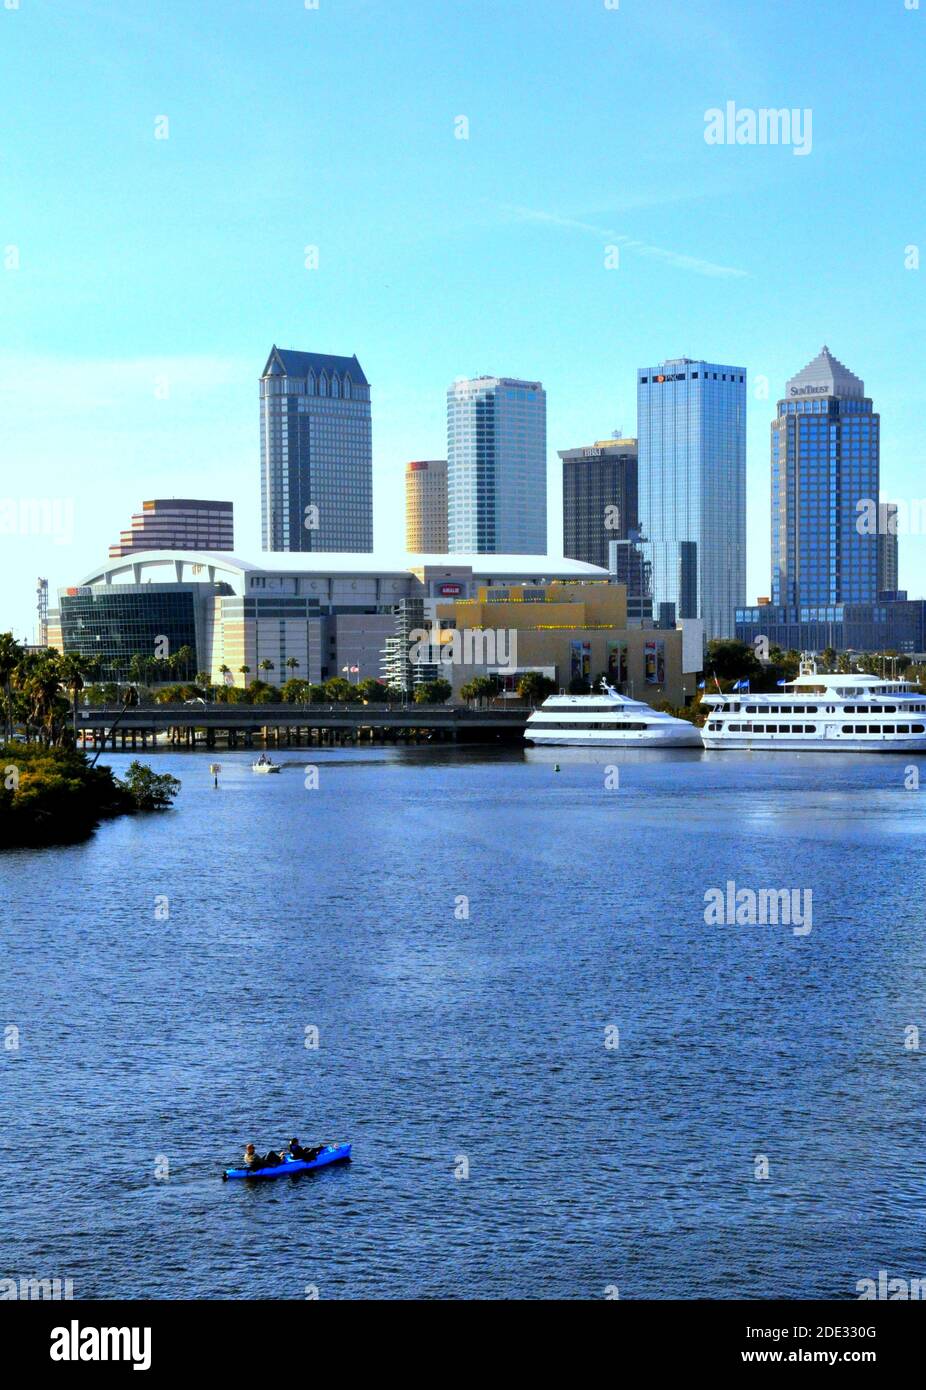 Tampa, Florida, U.S.A - September 22, 2015 - The view of the city by the bay by the cruise port Stock Photo